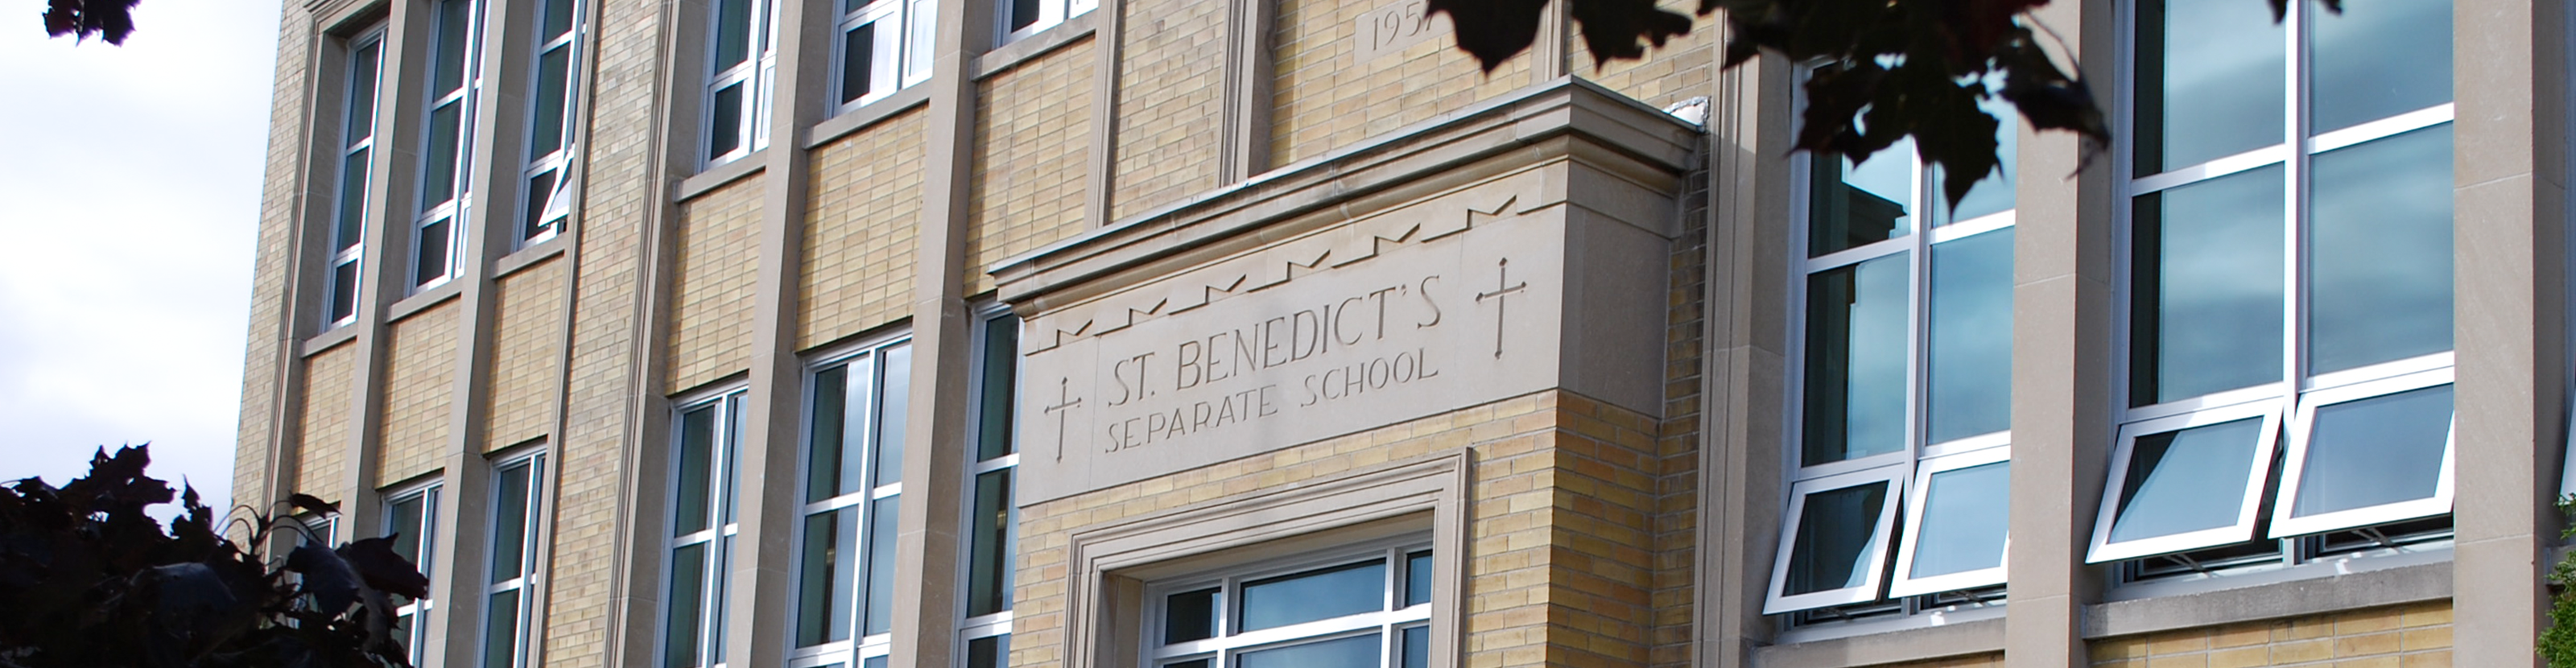 An image of the front of the school building.